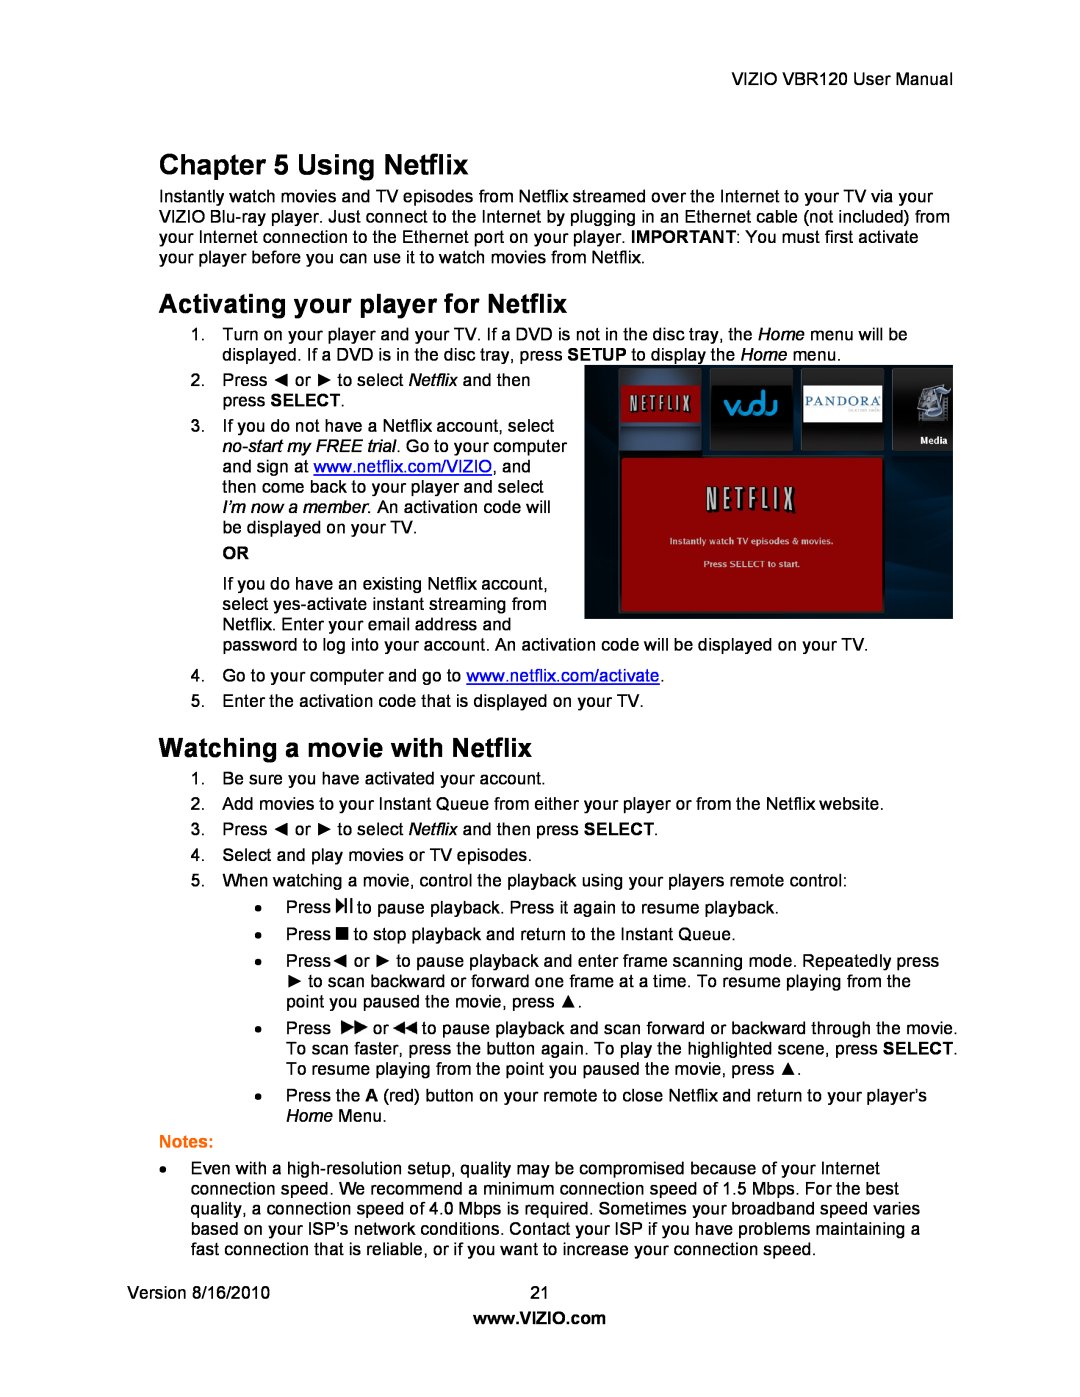 Vizio VBR 120 user manual Using Netflix, Activating your player for Netflix, Watching a movie with Netflix 